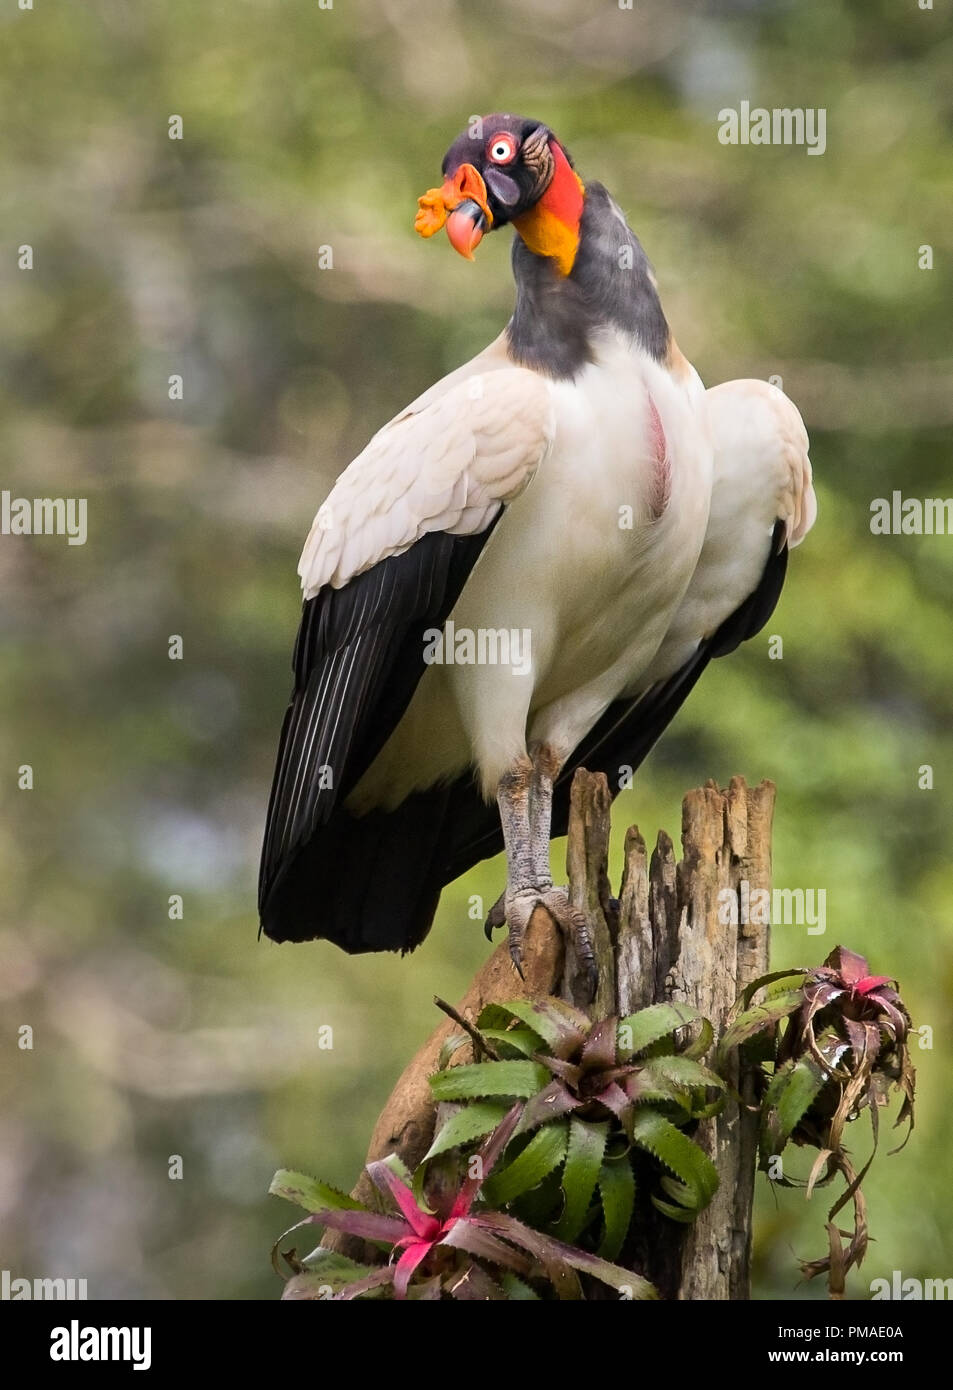 A perched king vulture photographed in Boca Tapada, Costa Rica Stock Photo